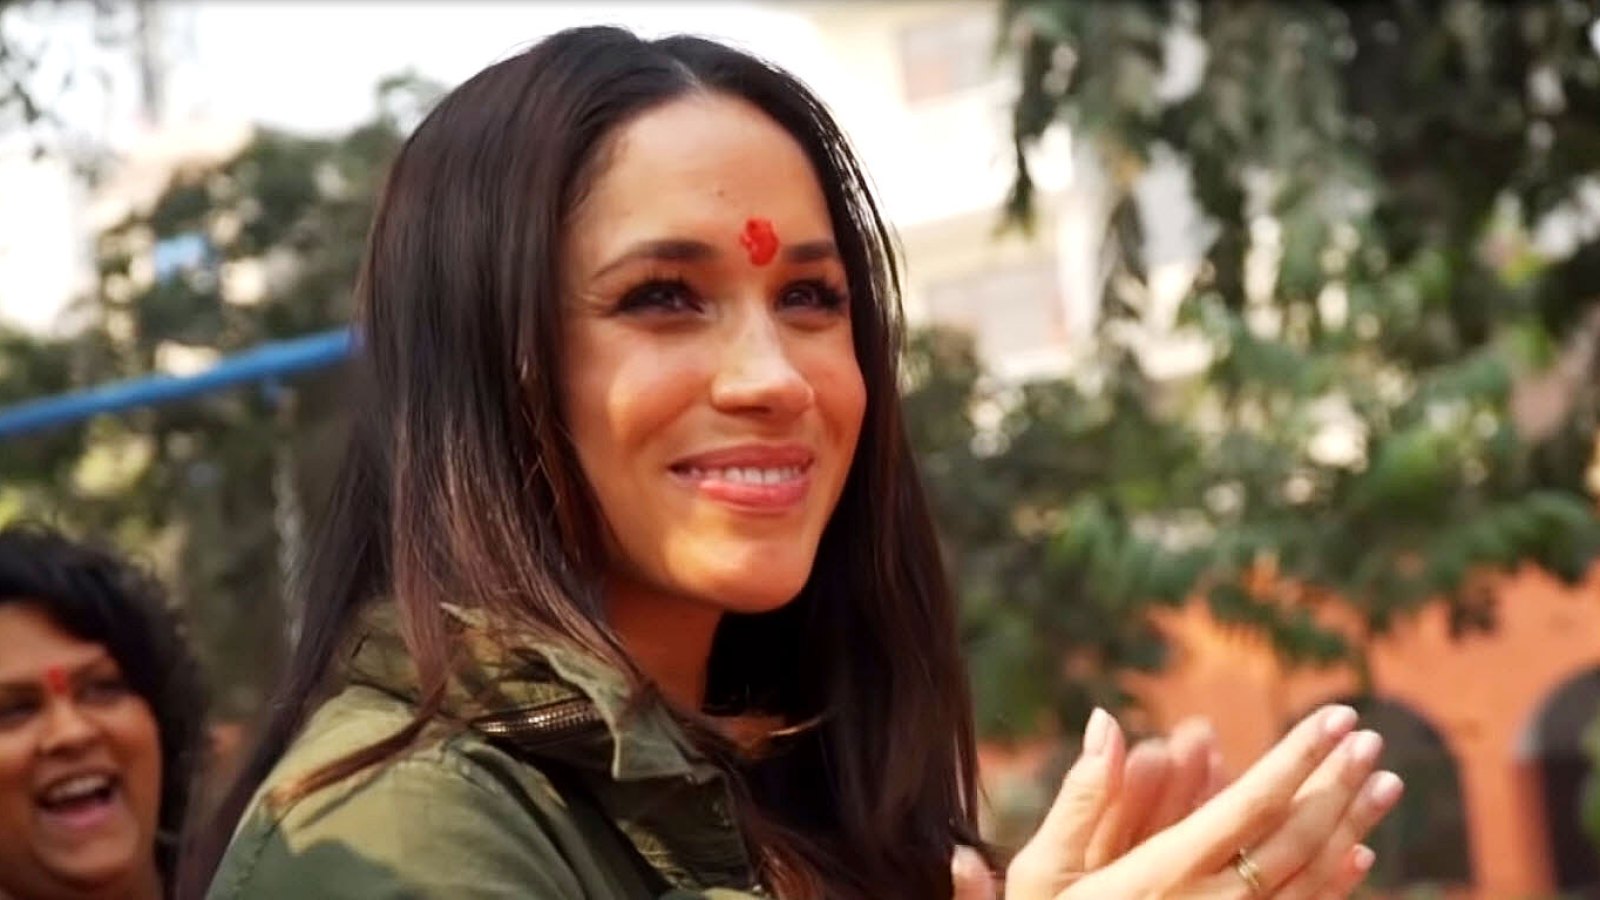 Duchess Meghan Touring in India Before Getting Engaged to Prince Harry